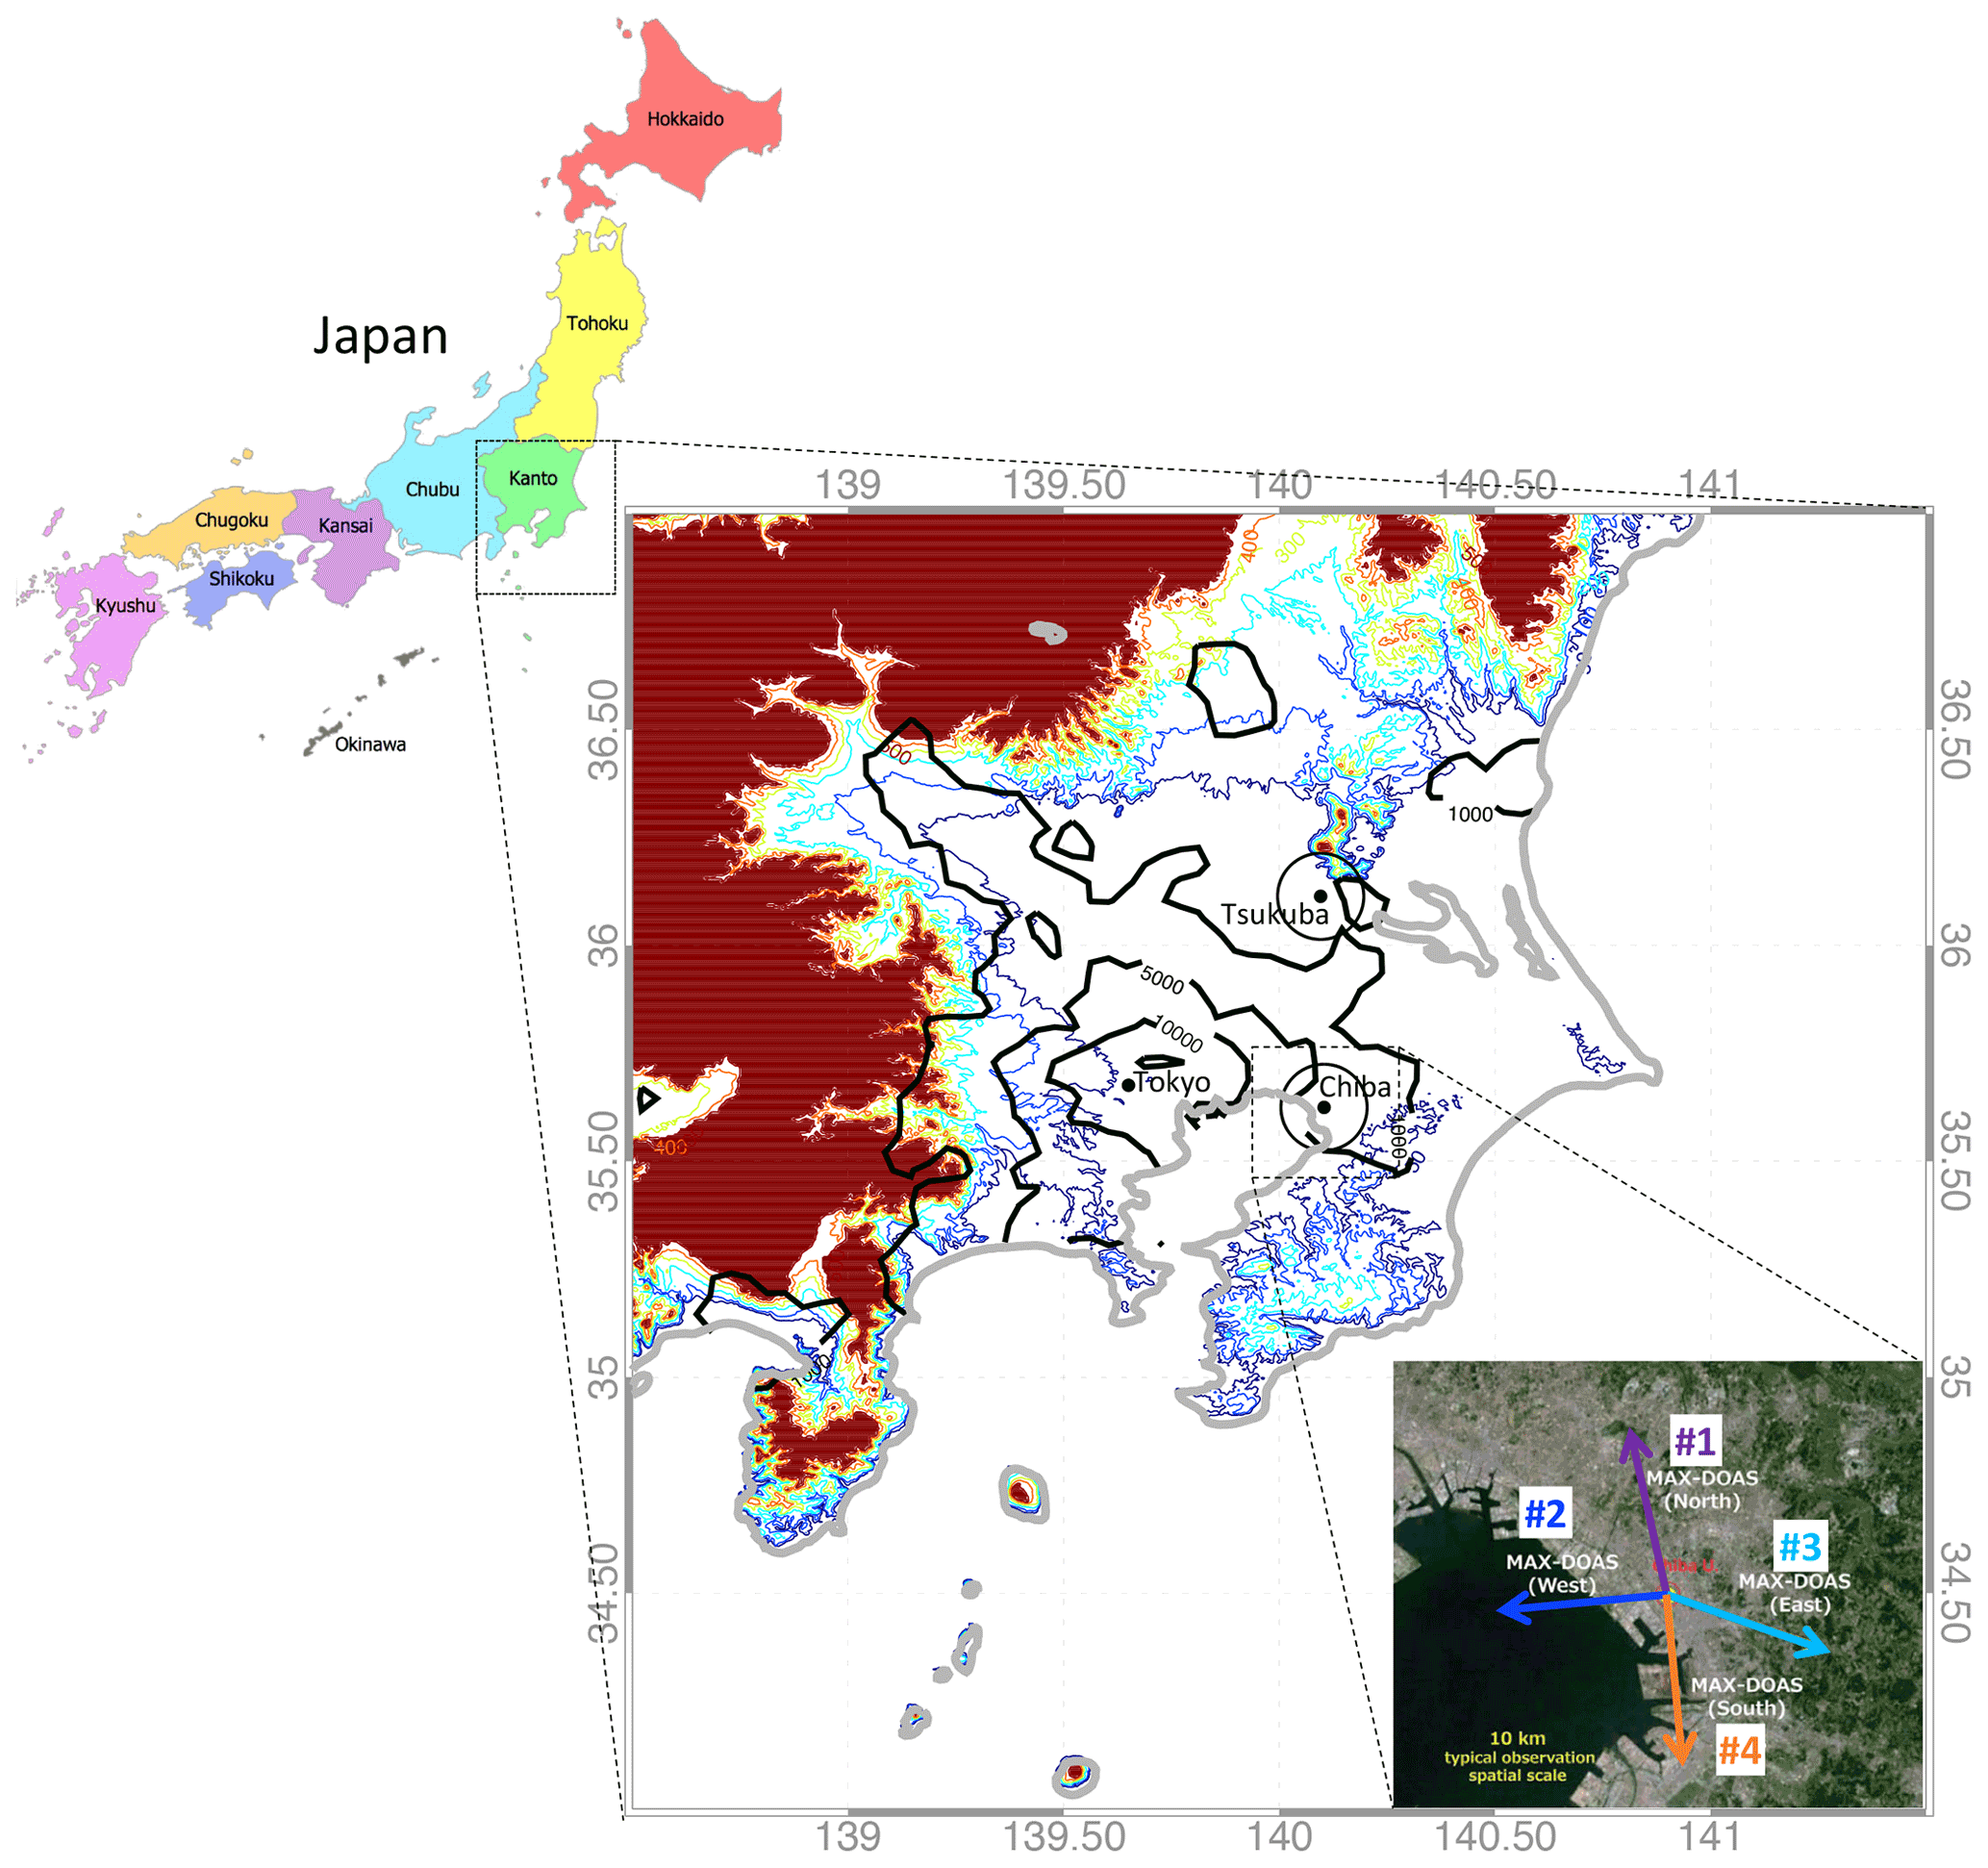 Spatial extent of the ecological programs. The red dashed line is